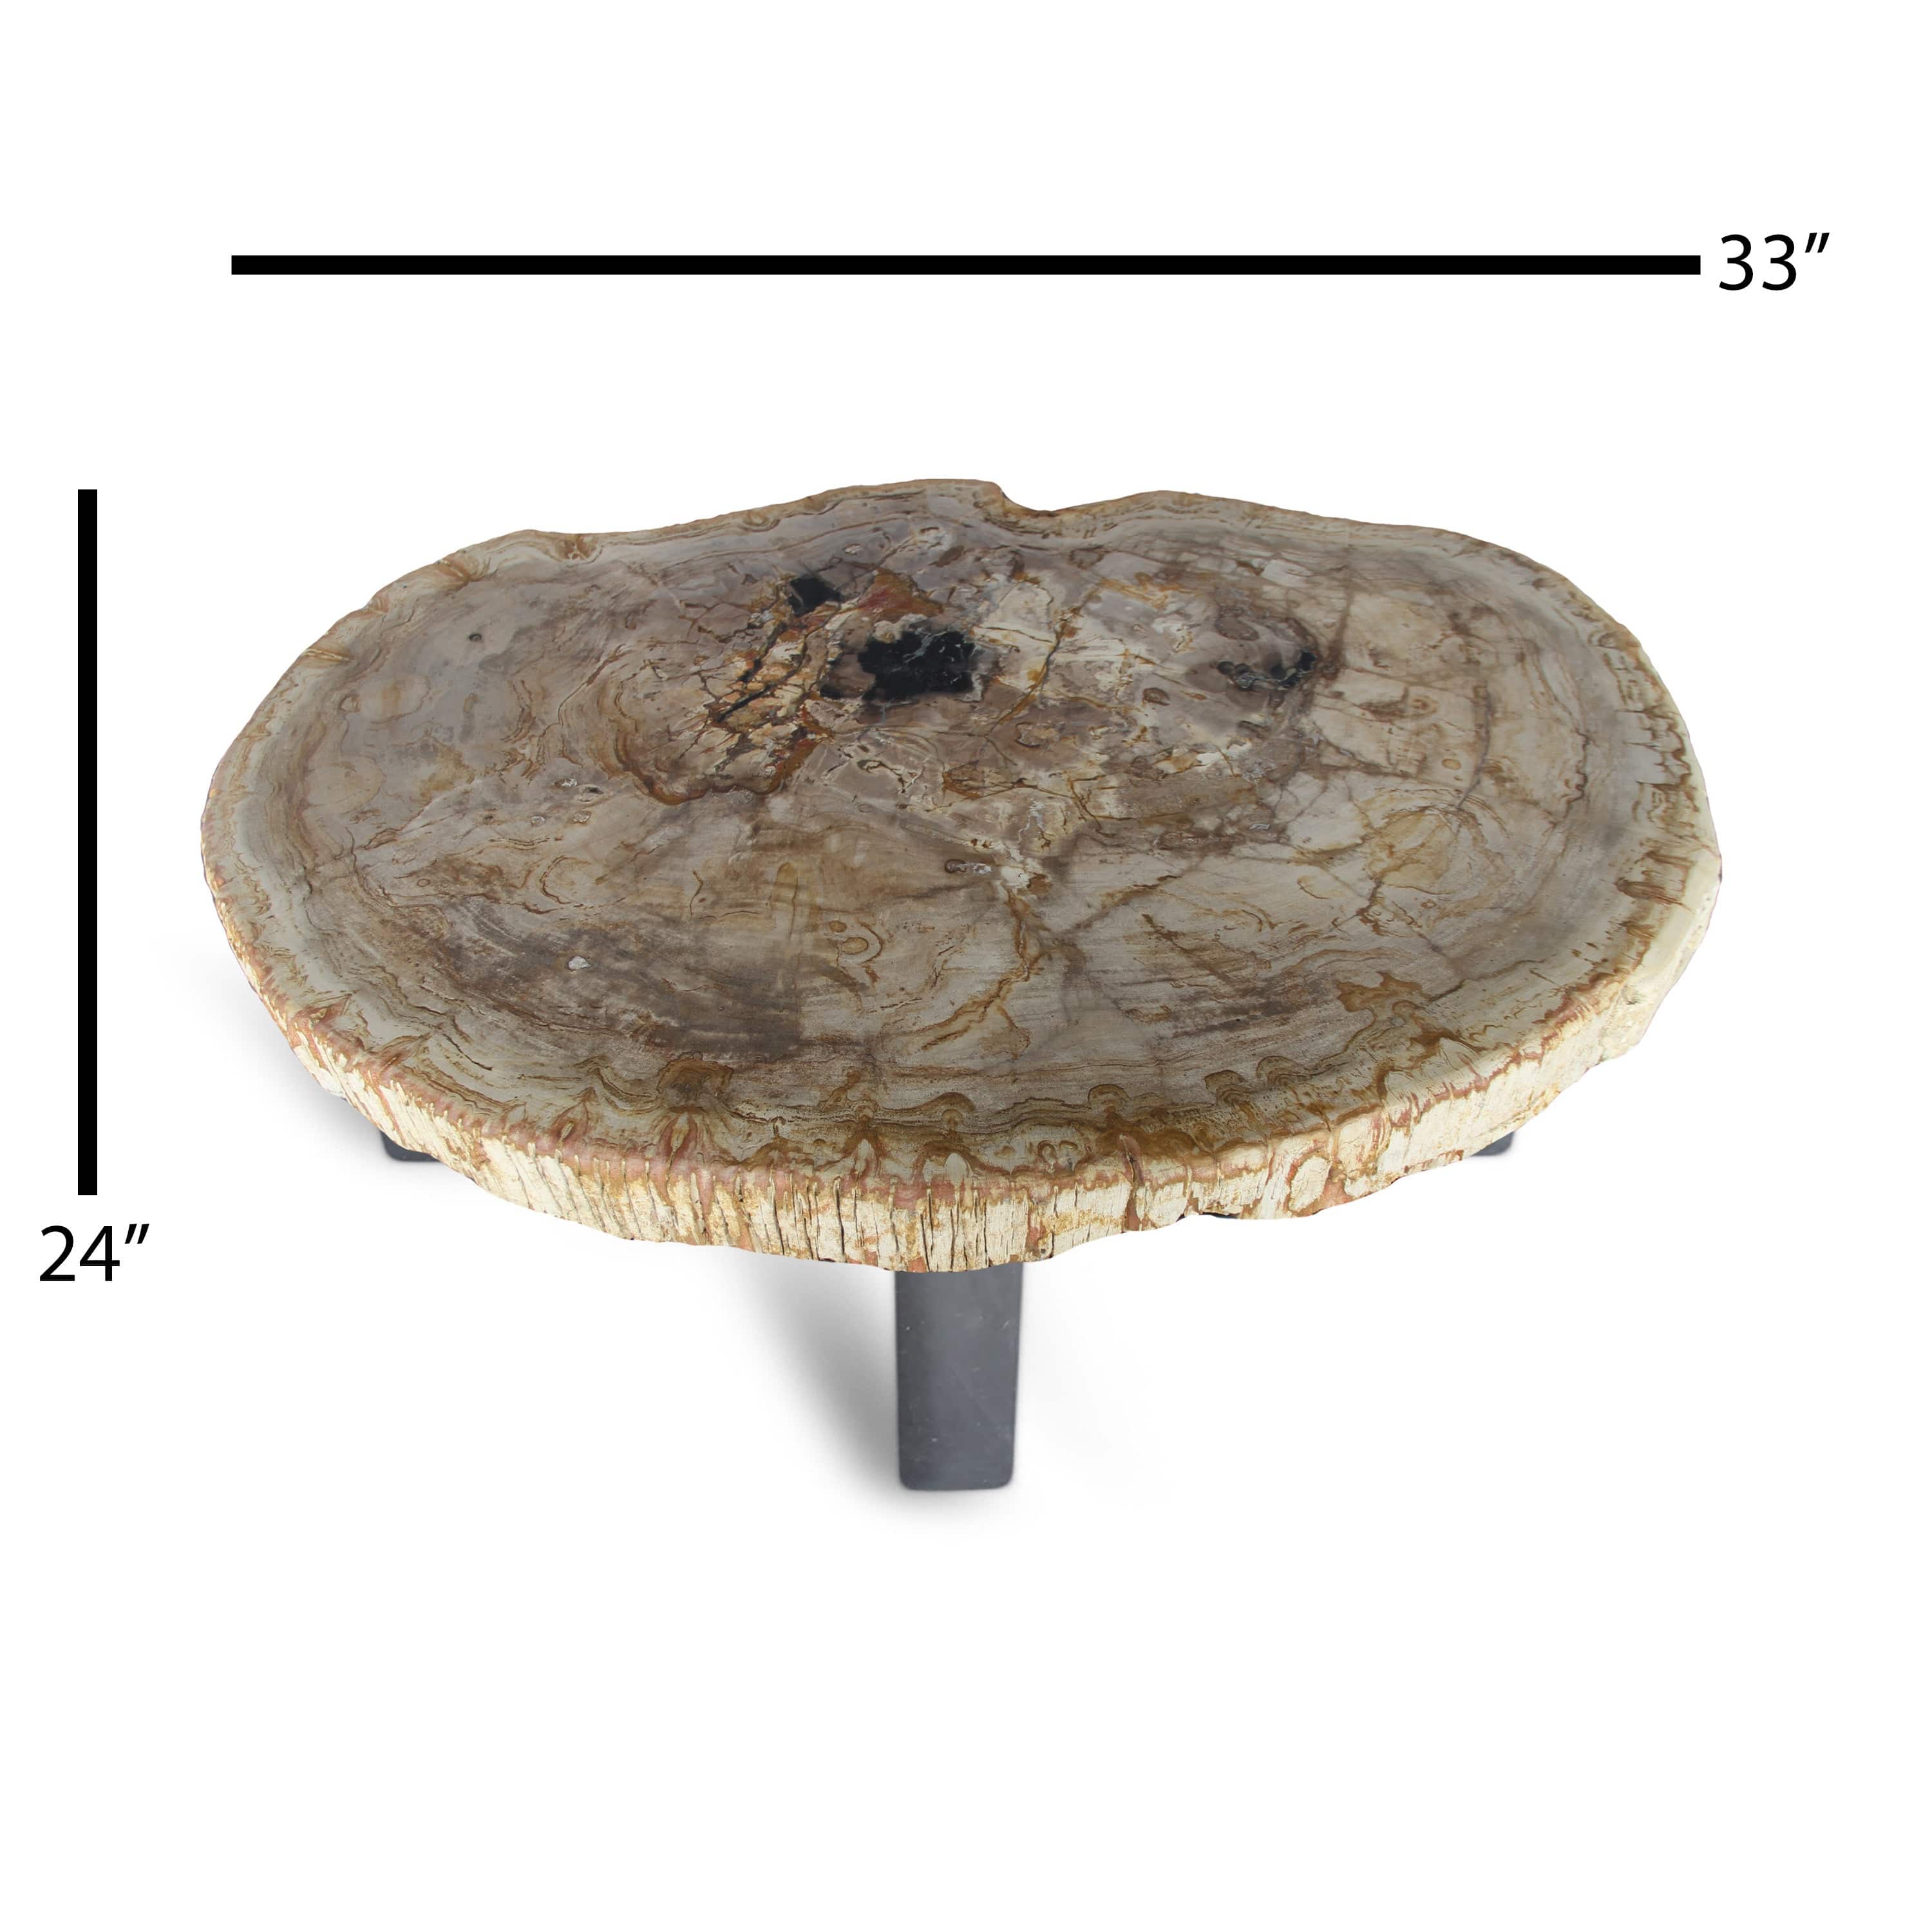 Kalifano Petrified Wood Petrified Wood Round Slab Coffee Table from Indonesia - 33" / 141 lbs PWT5200.003